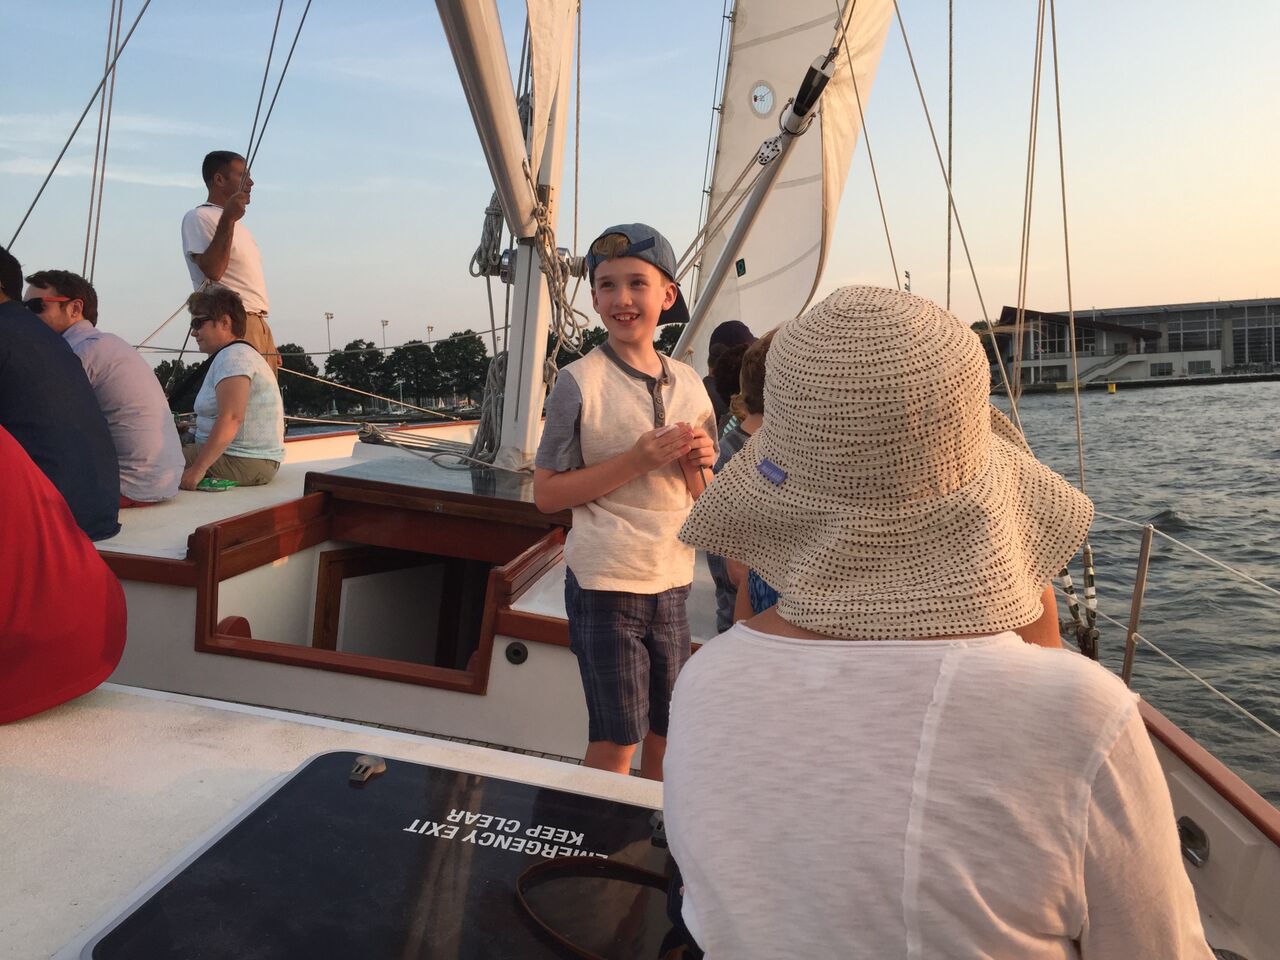 Little boy smiling and enjoying his sail on the schooner